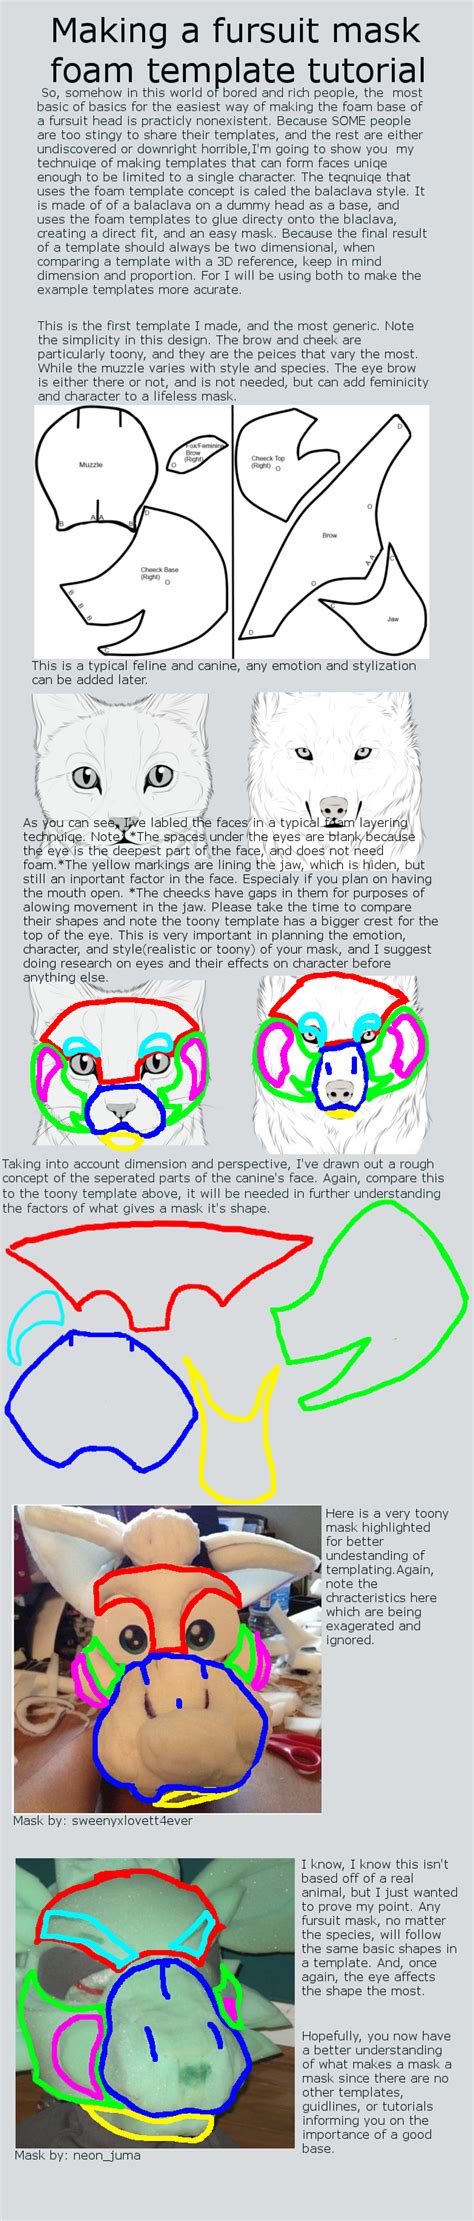 Making Your Own Fursuit Mask Template Tutorial By IAmNotAPegasus On